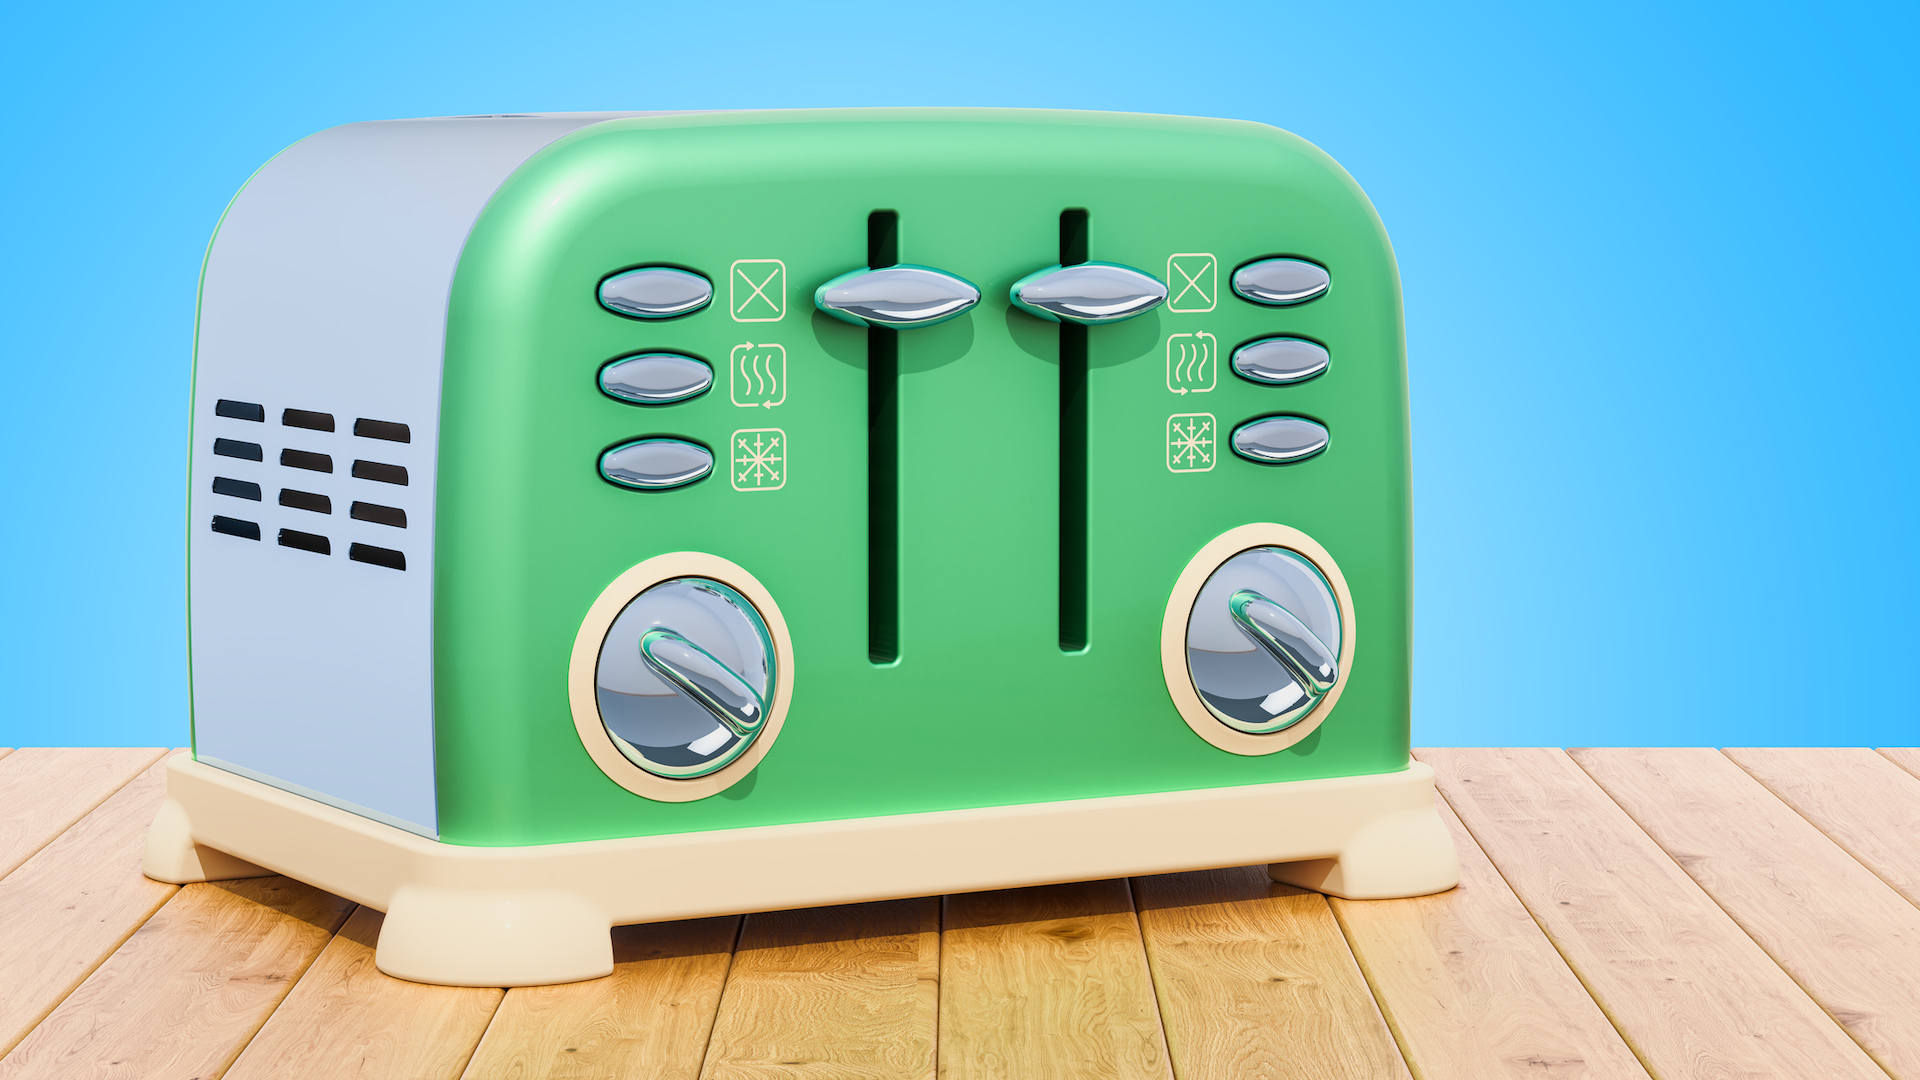 A cool toaster, If you can imagine such a thing